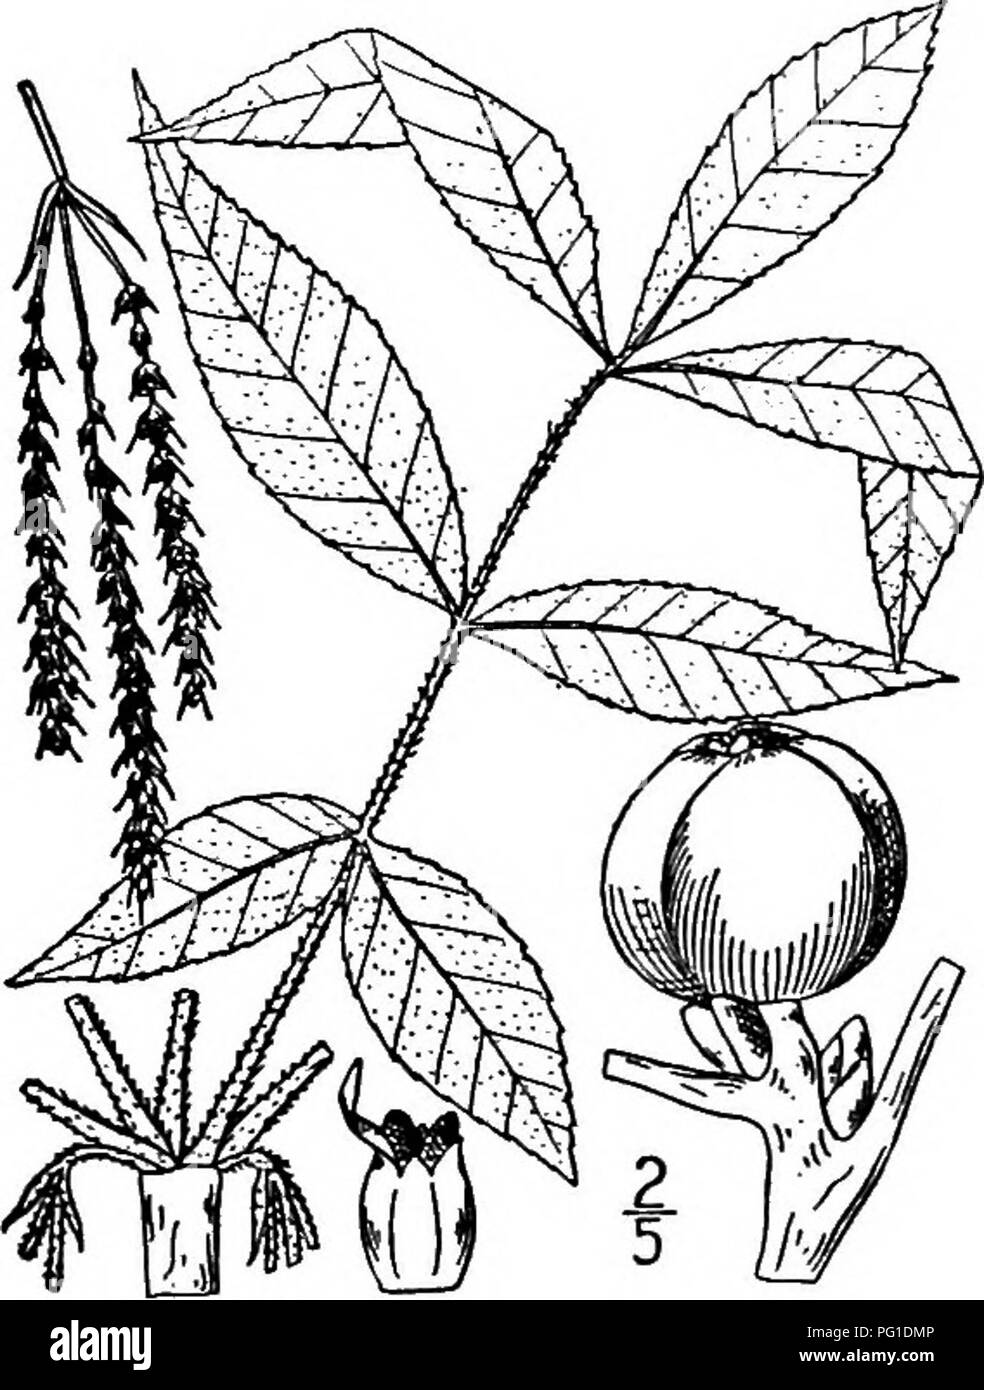 . North American trees : being descriptions and illustrations of the trees growing independently of cultivation in North America, north of Mexico and the West Indies . Trees. 230 The Hickories The pistillate flowers are densely brown-haiiy. The fruit is subglobose or obovoid to pear-shaped, rusty brown and slightly winged, the husk rather thin, splitting rather tardily into 4 valves; nut white or nearly so, laterally flattened, 4-celled at the base, its shell moderately thin; seed sweet and edible. The species has been confused with Hicoria villosa, which it much resembles. 7. MOCKER NUT —Hico Stock Photo